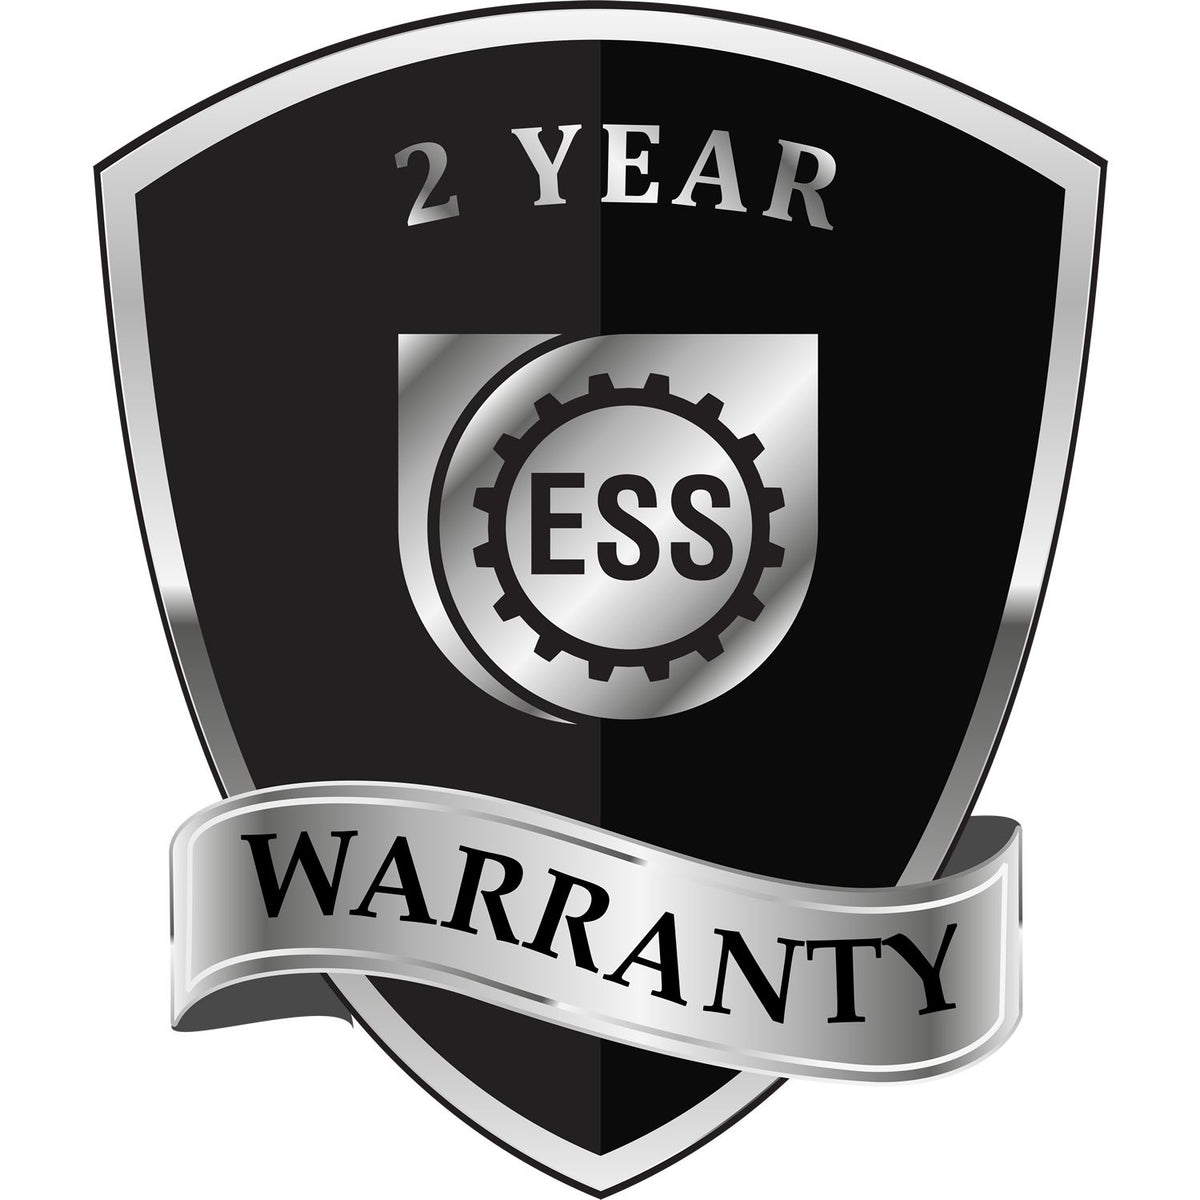 A black and silver badge or emblem showing warranty information for the Gift Virginia Engineer Seal